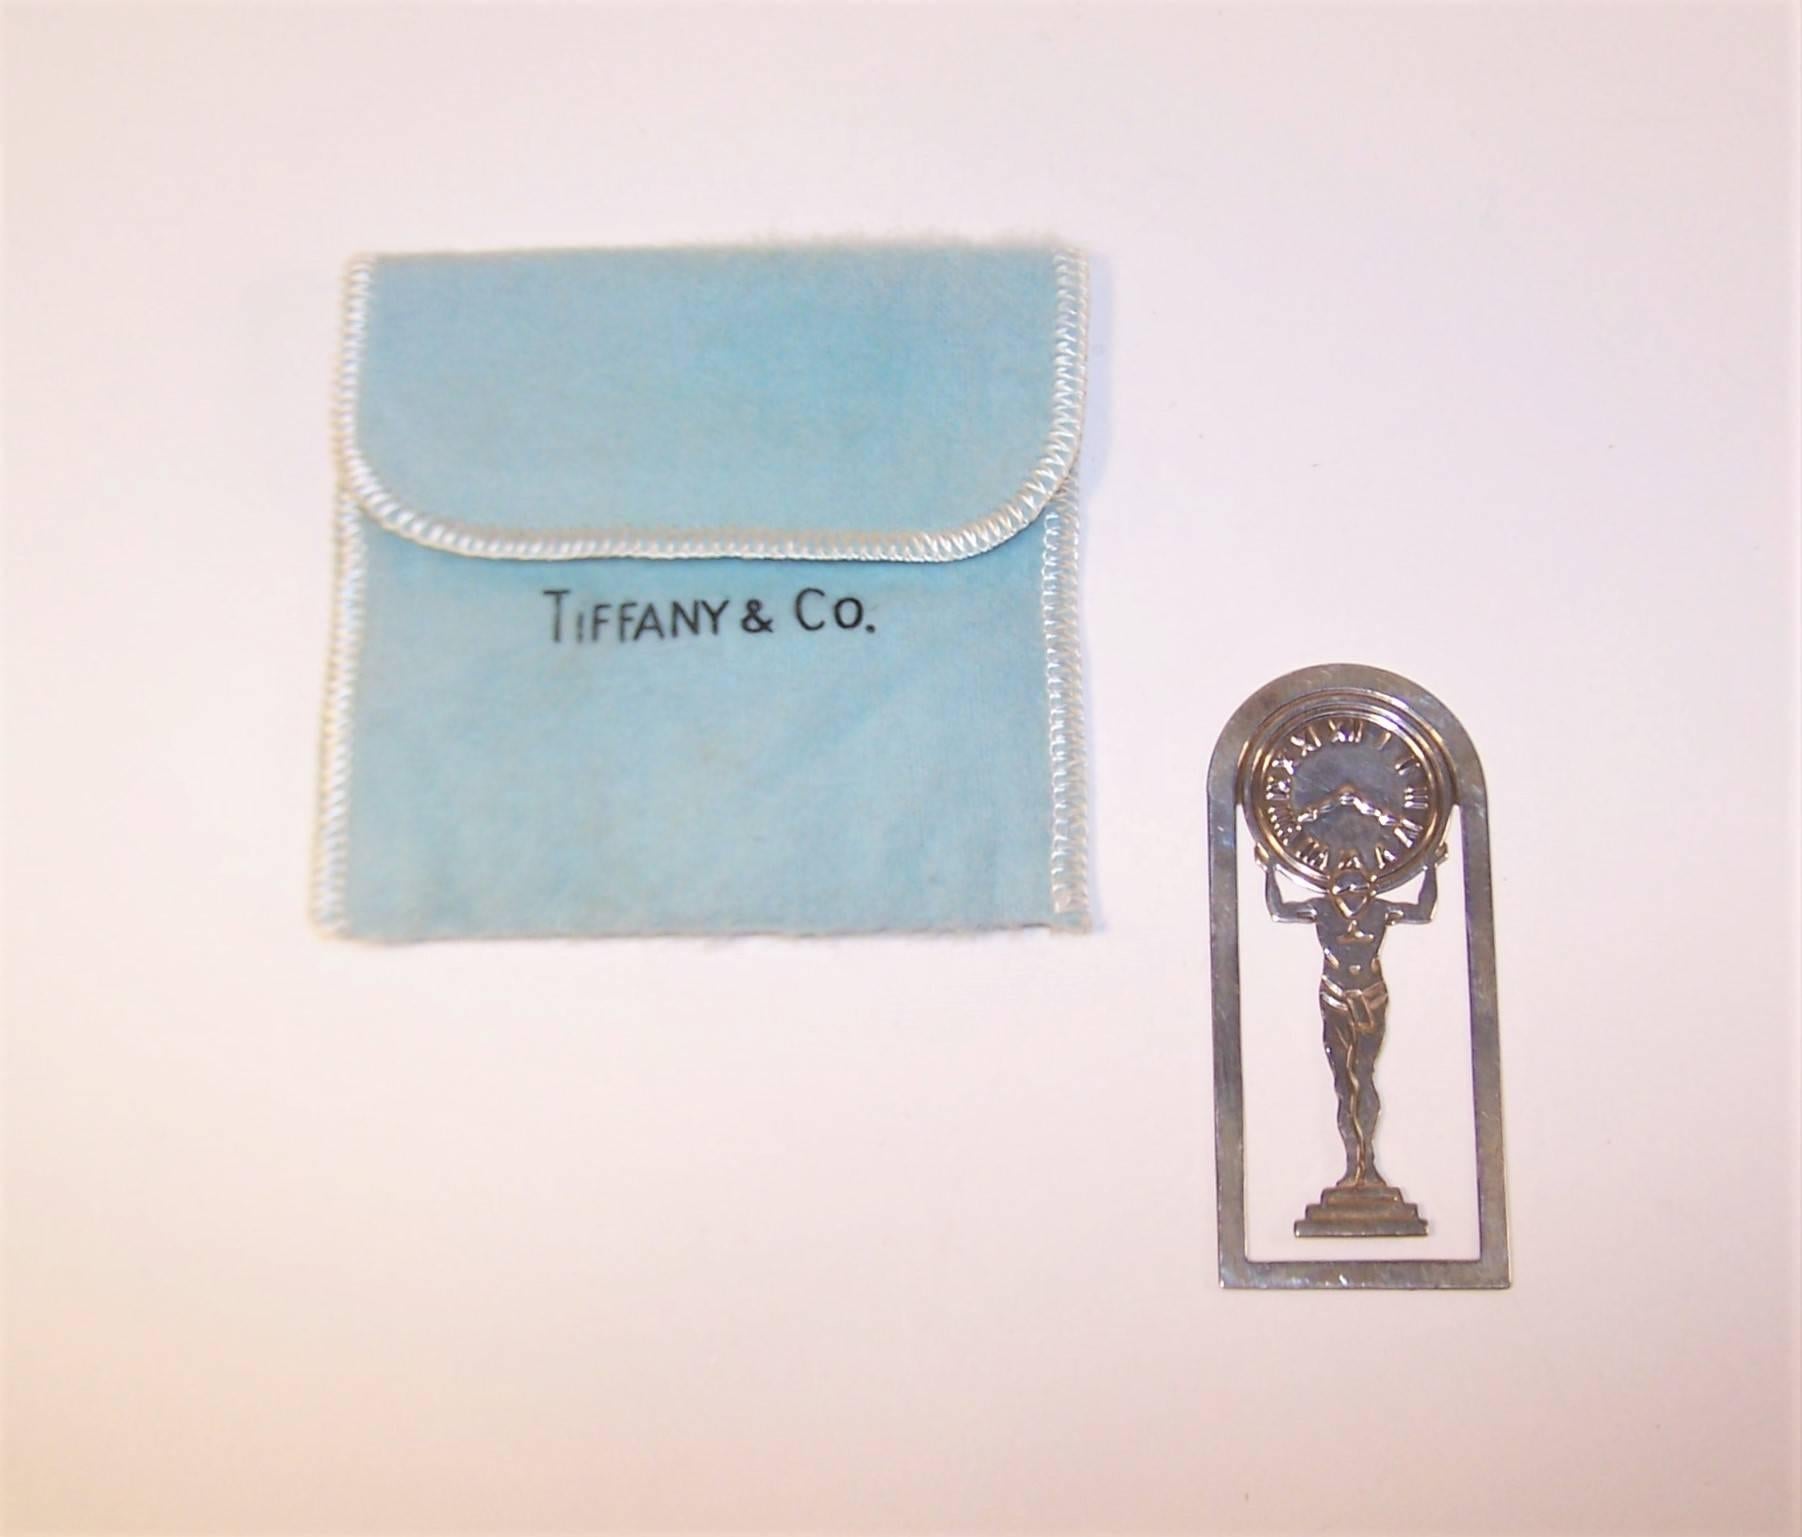 Mark a page with your favorite strongman!  This Tiffany & Co. sterling silver bookmark features an art deco style Atlas supporting a Roman numeral clock.  Perfect as a gift for your favorite bibliophile and complete with a Tiffany blue storage